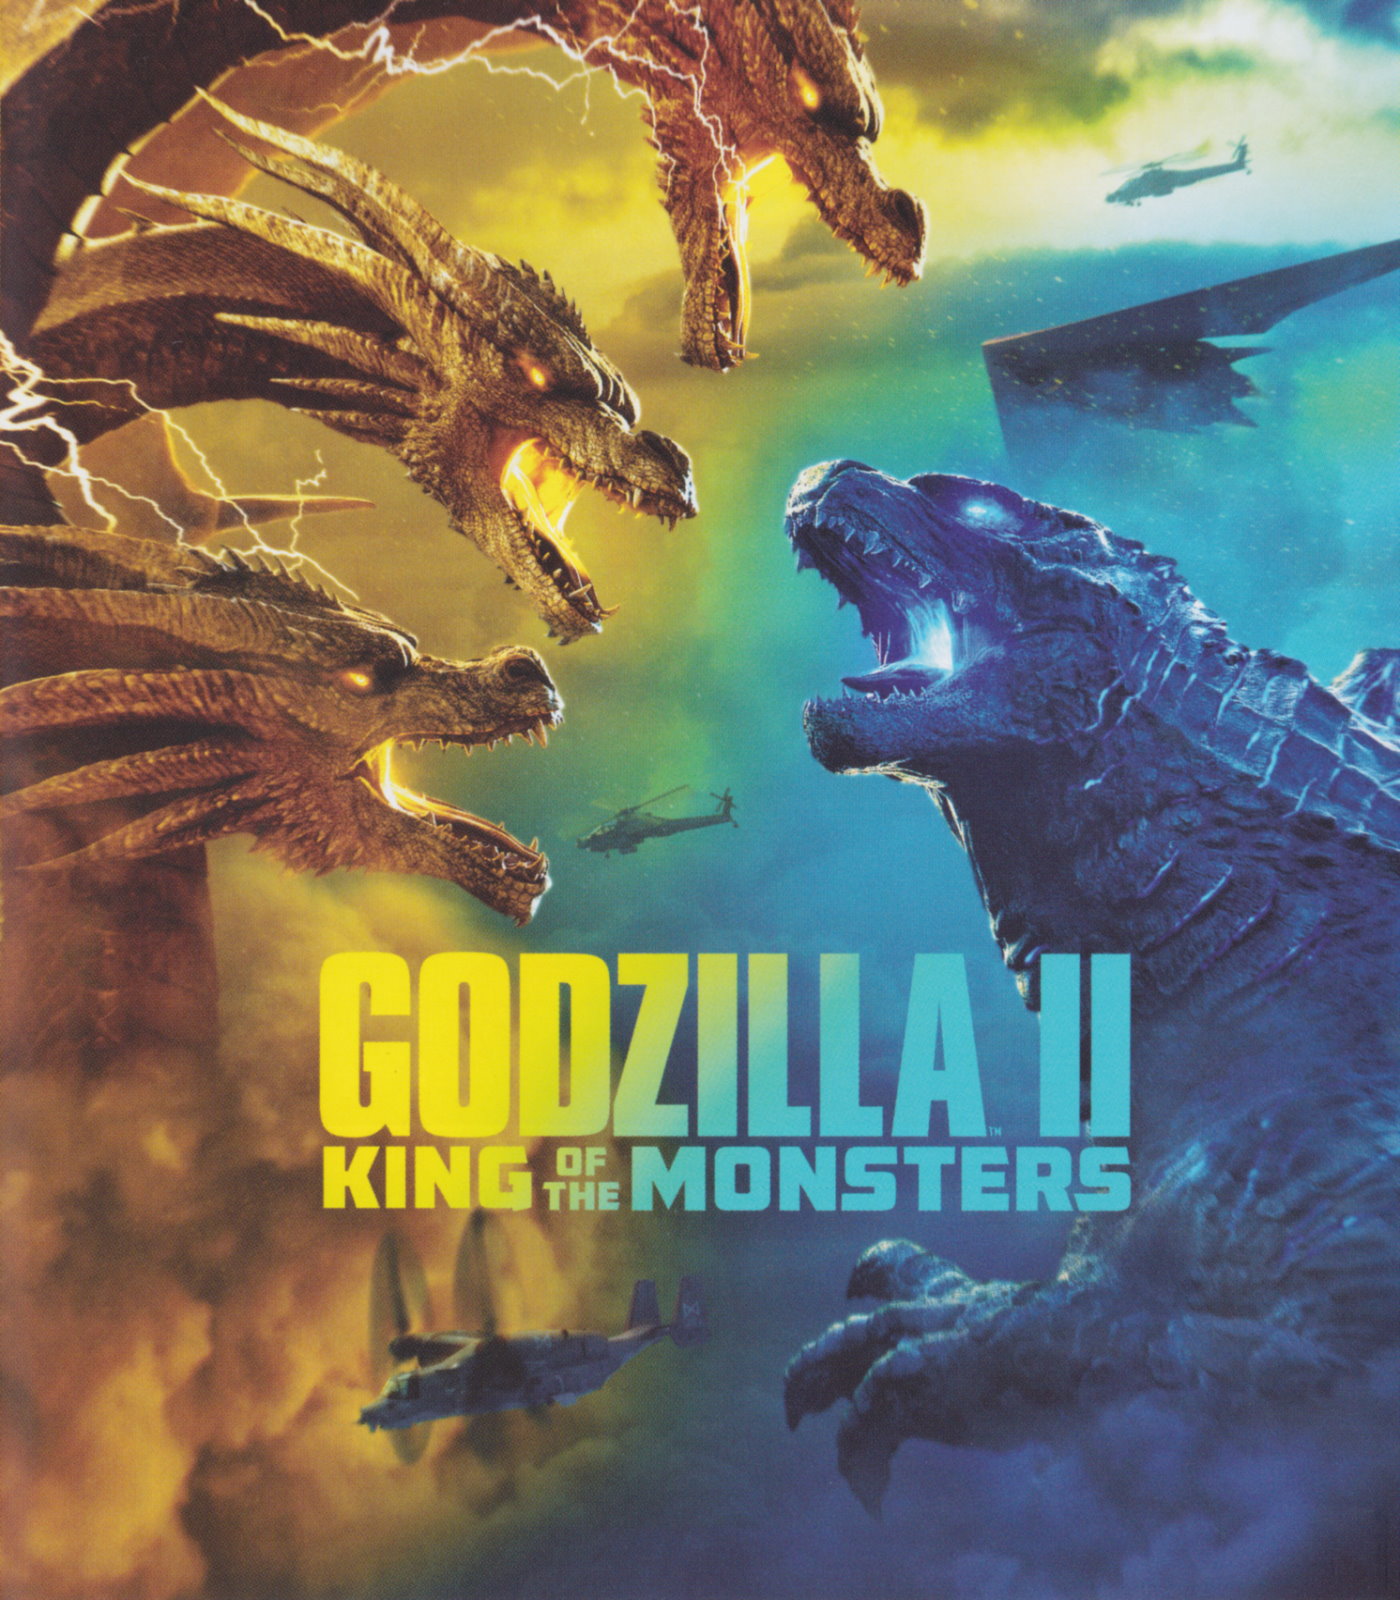 Cover - Godzilla II - King of the Monsters.jpg